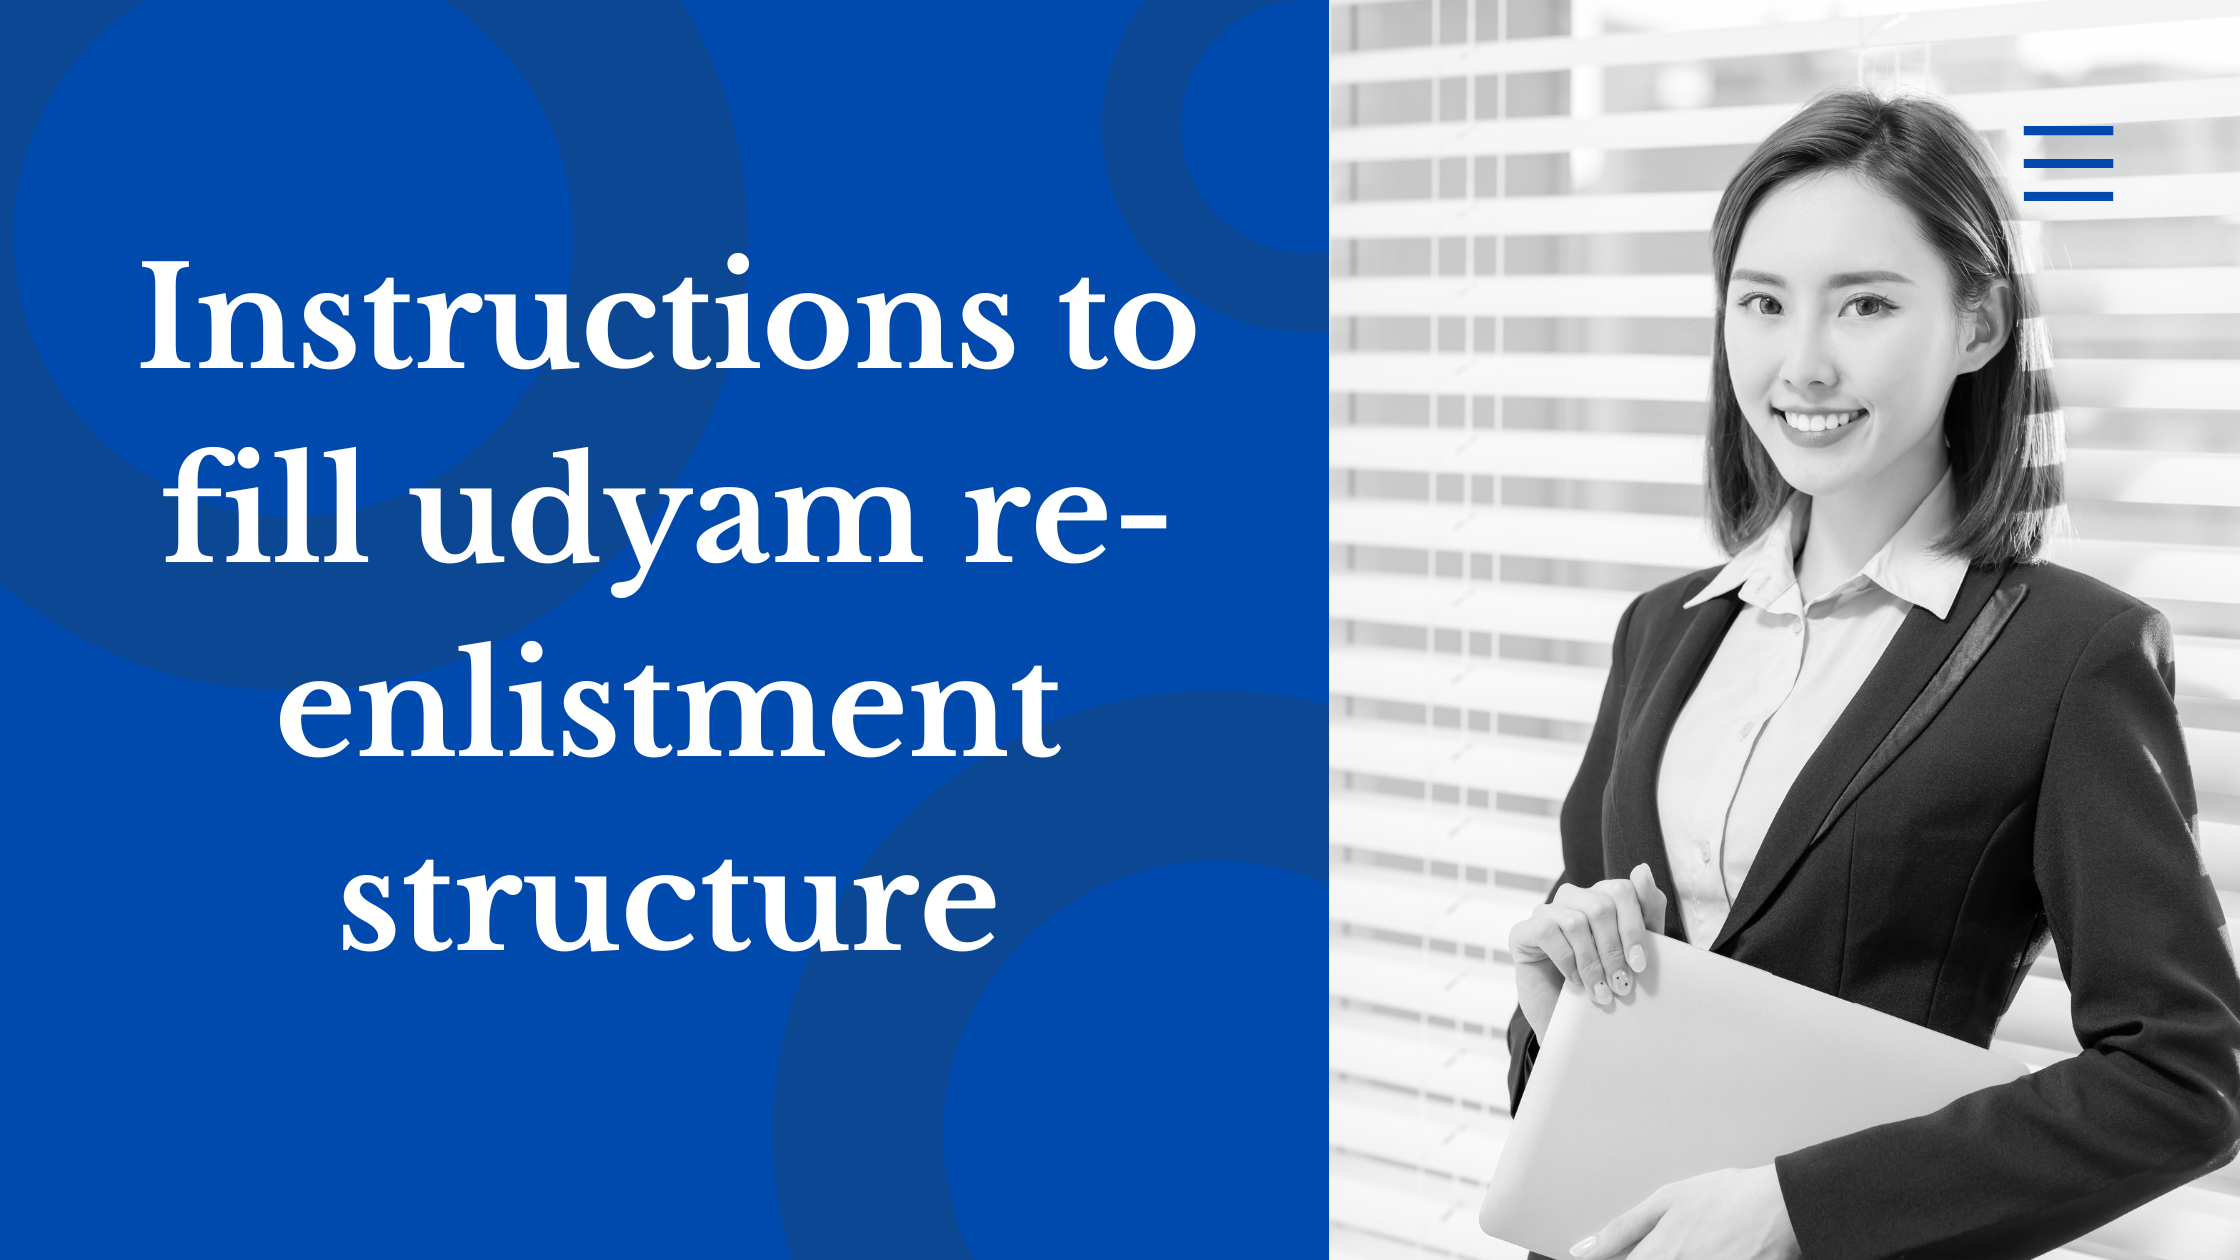 Instructions to fill udyam re-enlistment structure